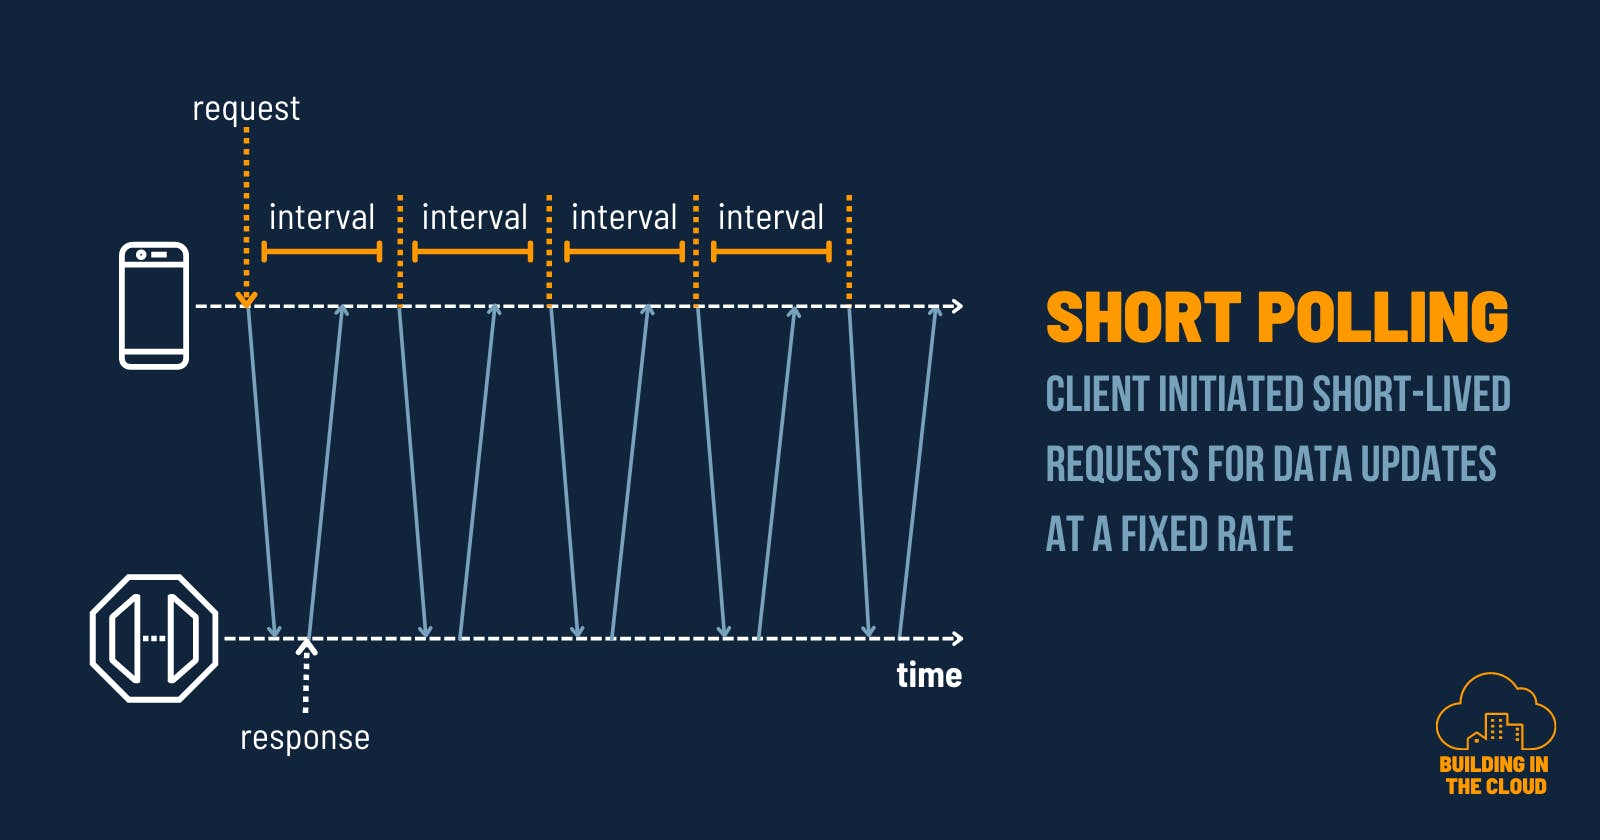 Short polling - client initiated short-lived requests for data updates at a fixed rate